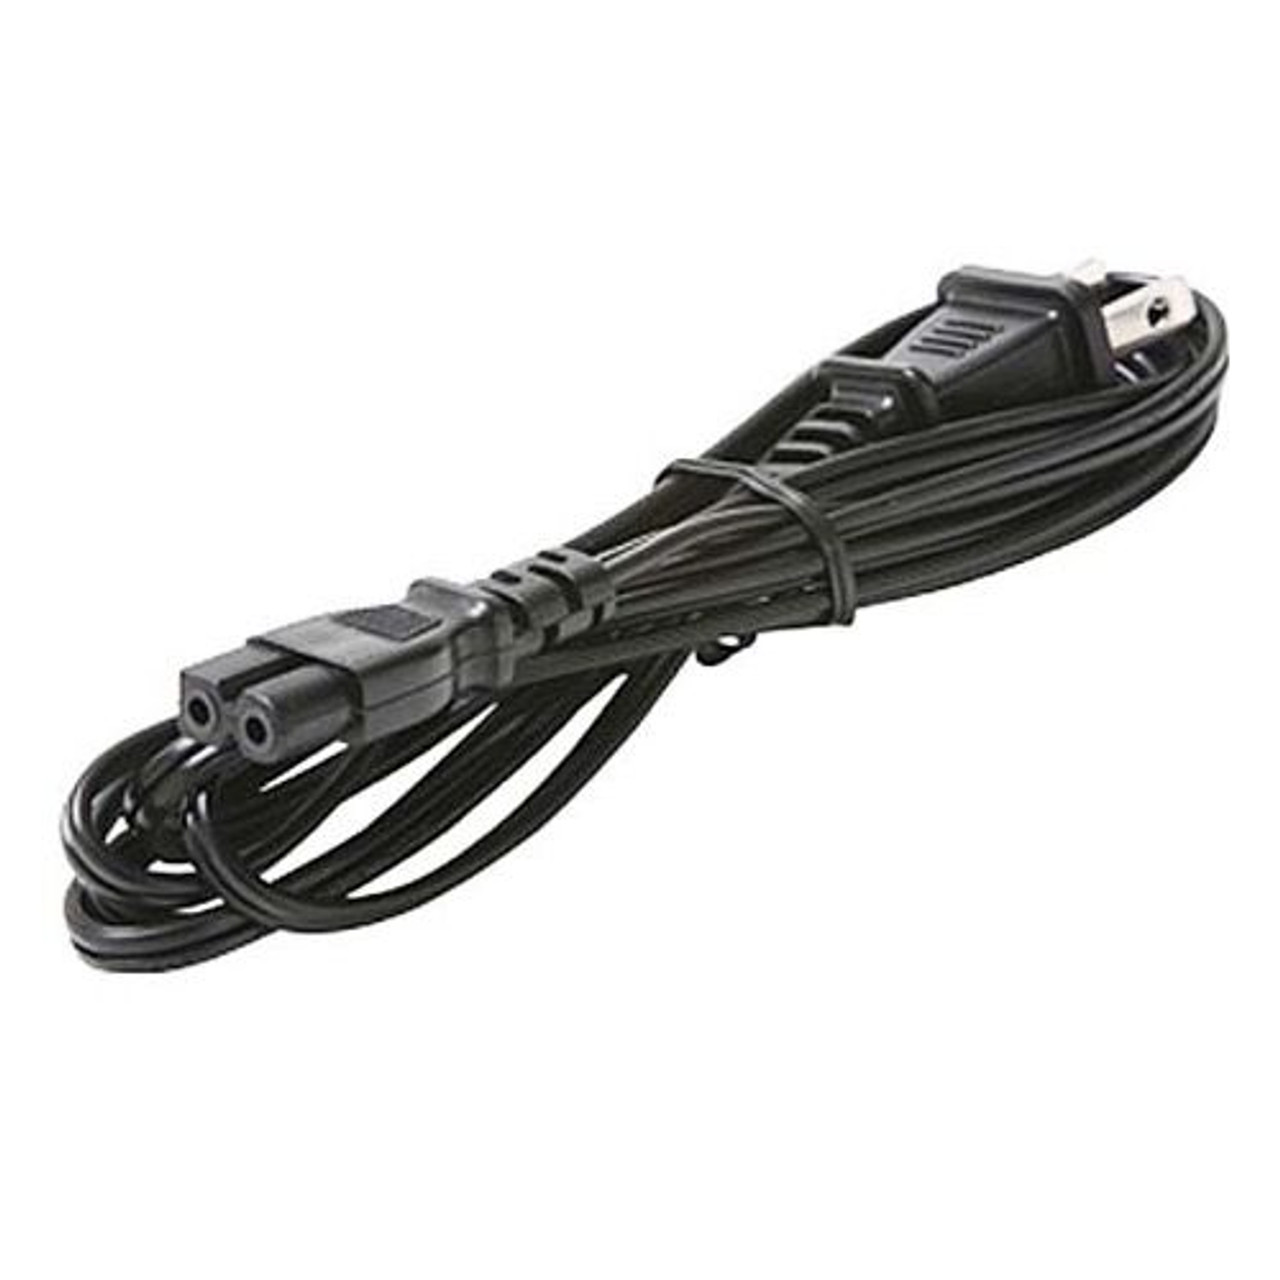 Steren 505-395 6' FT Polarized Power Cord Replacement 120 VAC 2 Conductor Black Electronic Equipment Stereo Radio Replacement Power Cord, UL Listed, Part # 505395